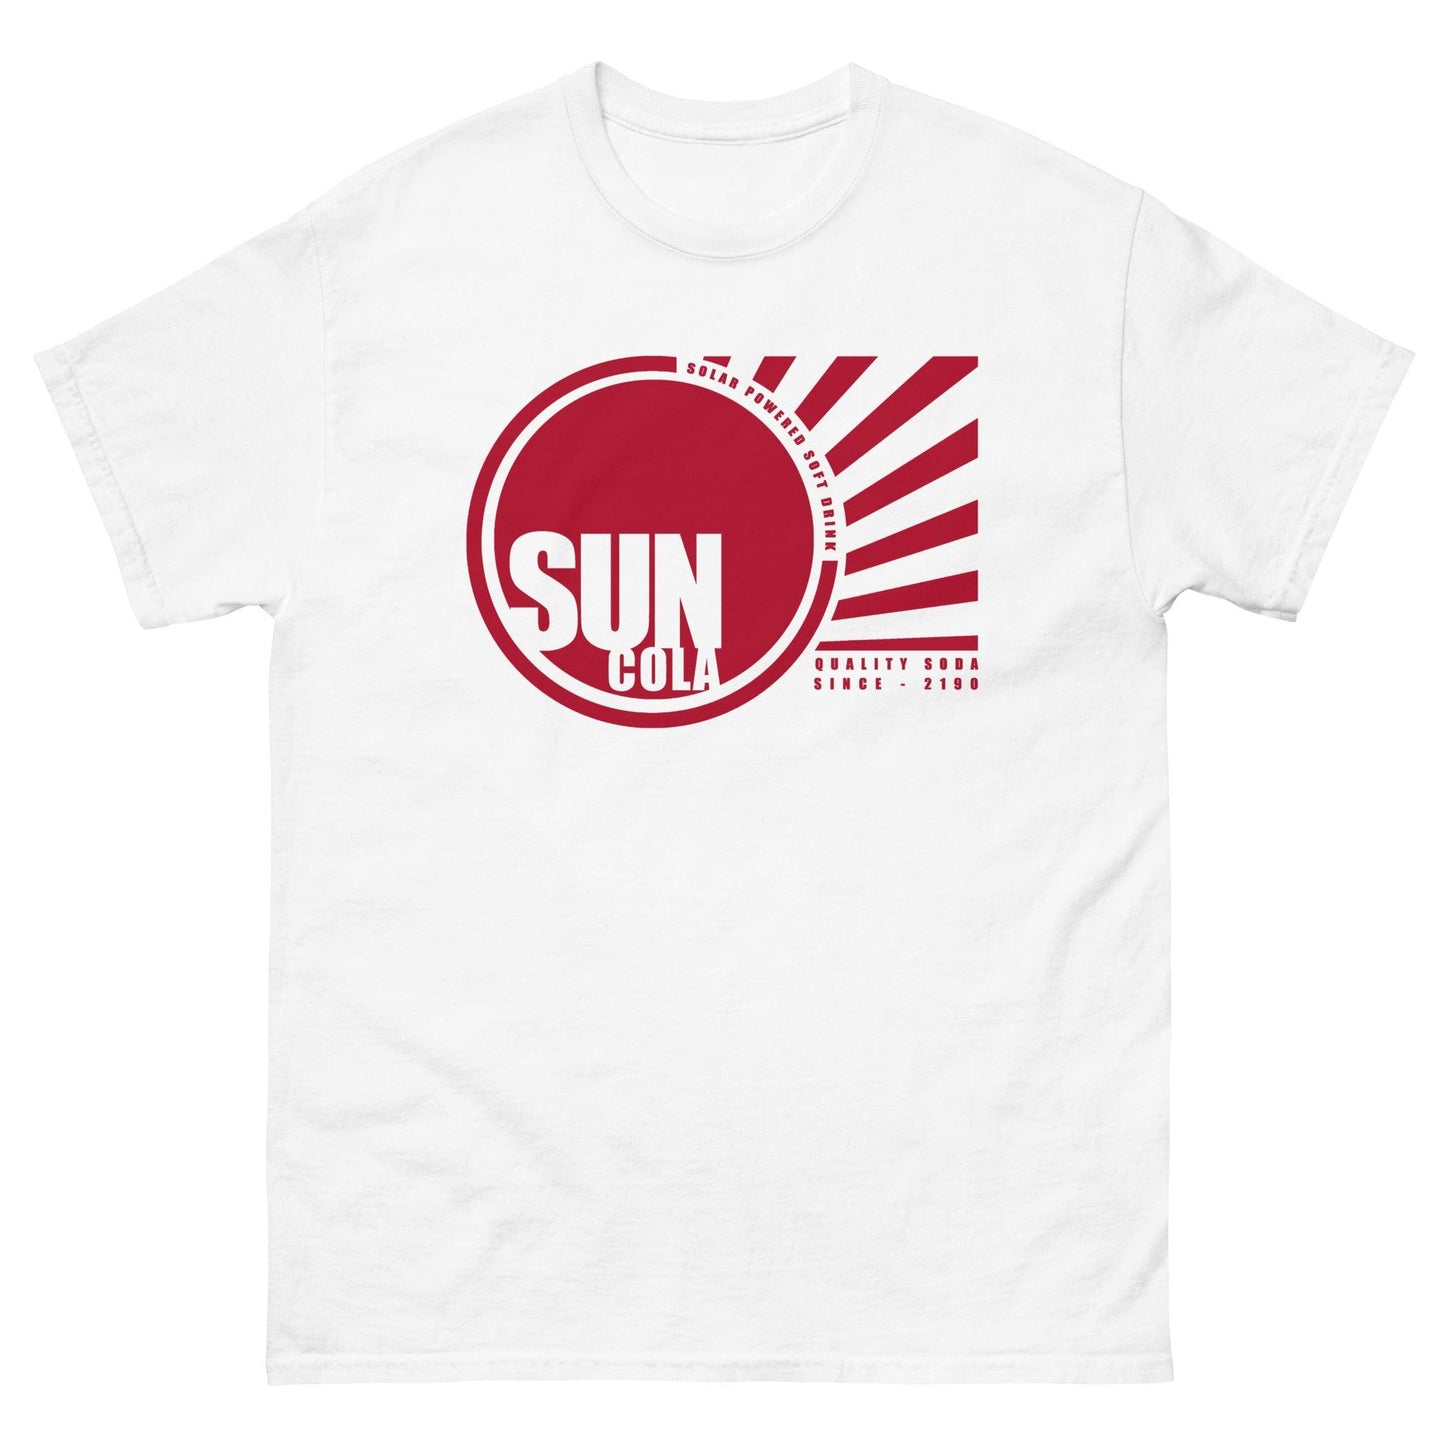 Sun Cola Tee (Red Print) - Level Up Gamer Wear